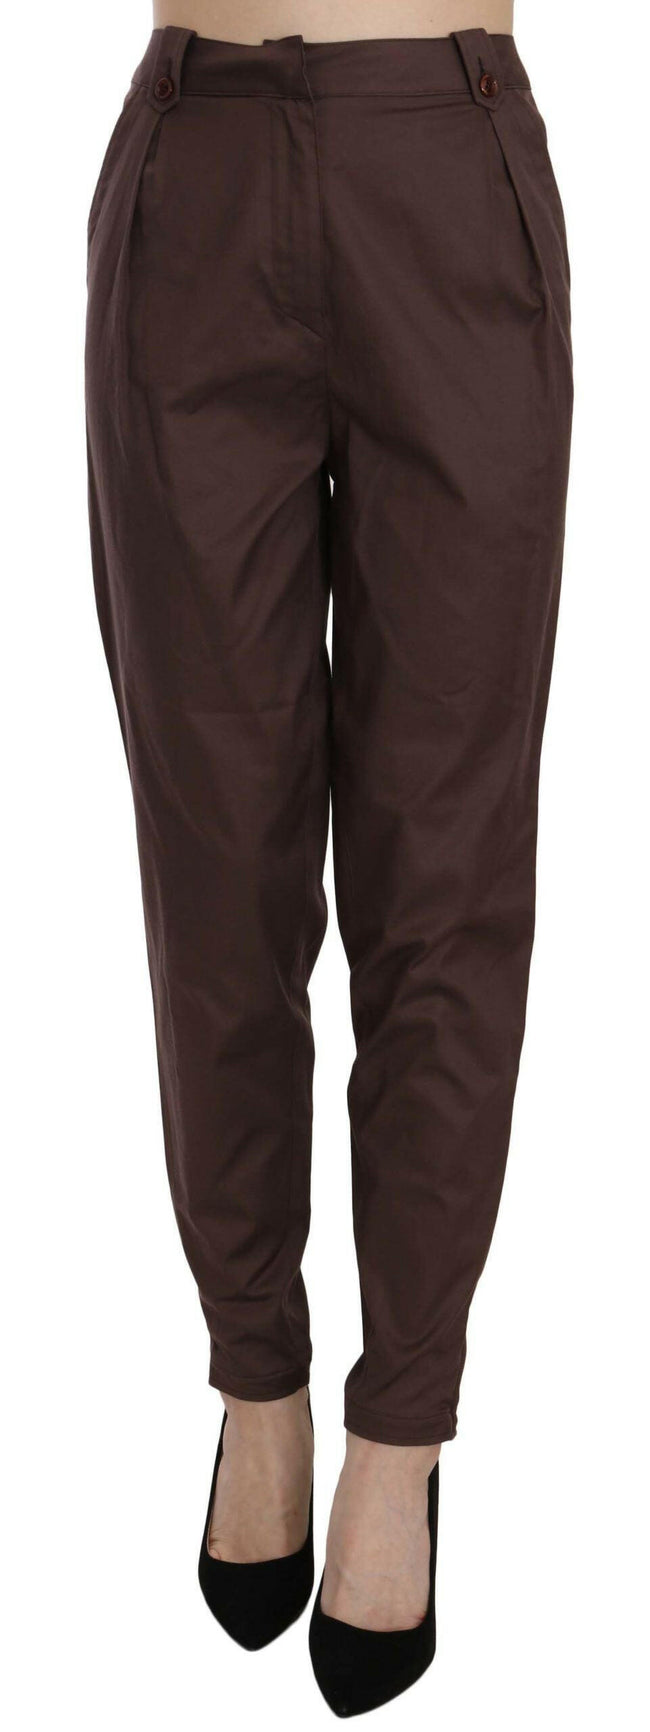 Just Cavalli Brown High Waist Tapered Formal Trousers Pants - GENUINE AUTHENTIC BRAND LLC  